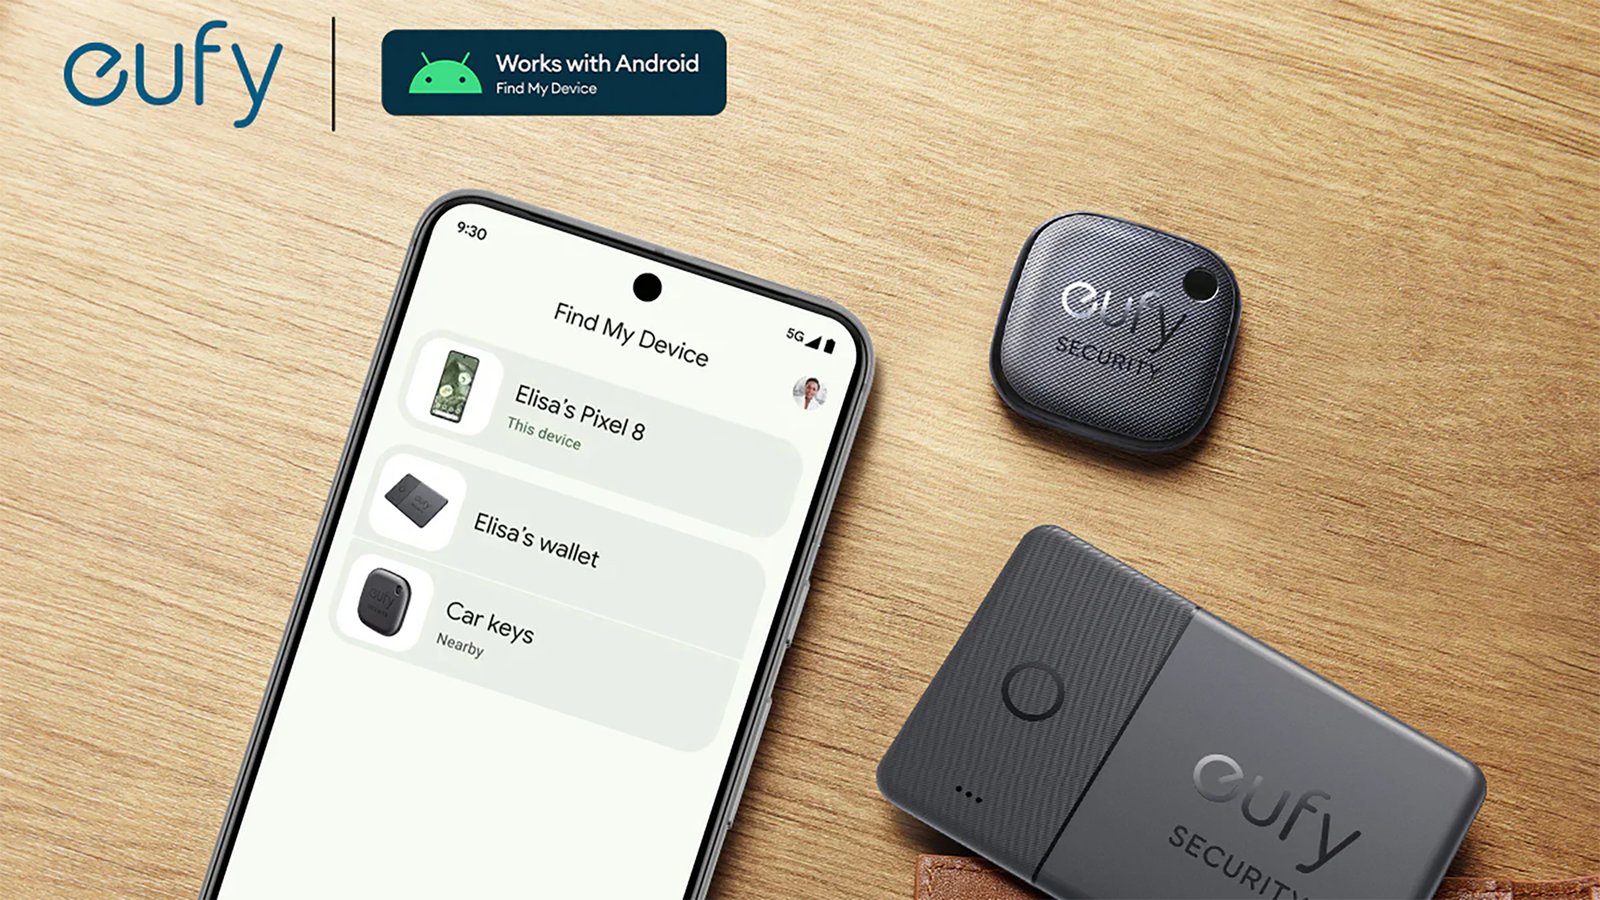 eufy Find My Device network trackers coming in June